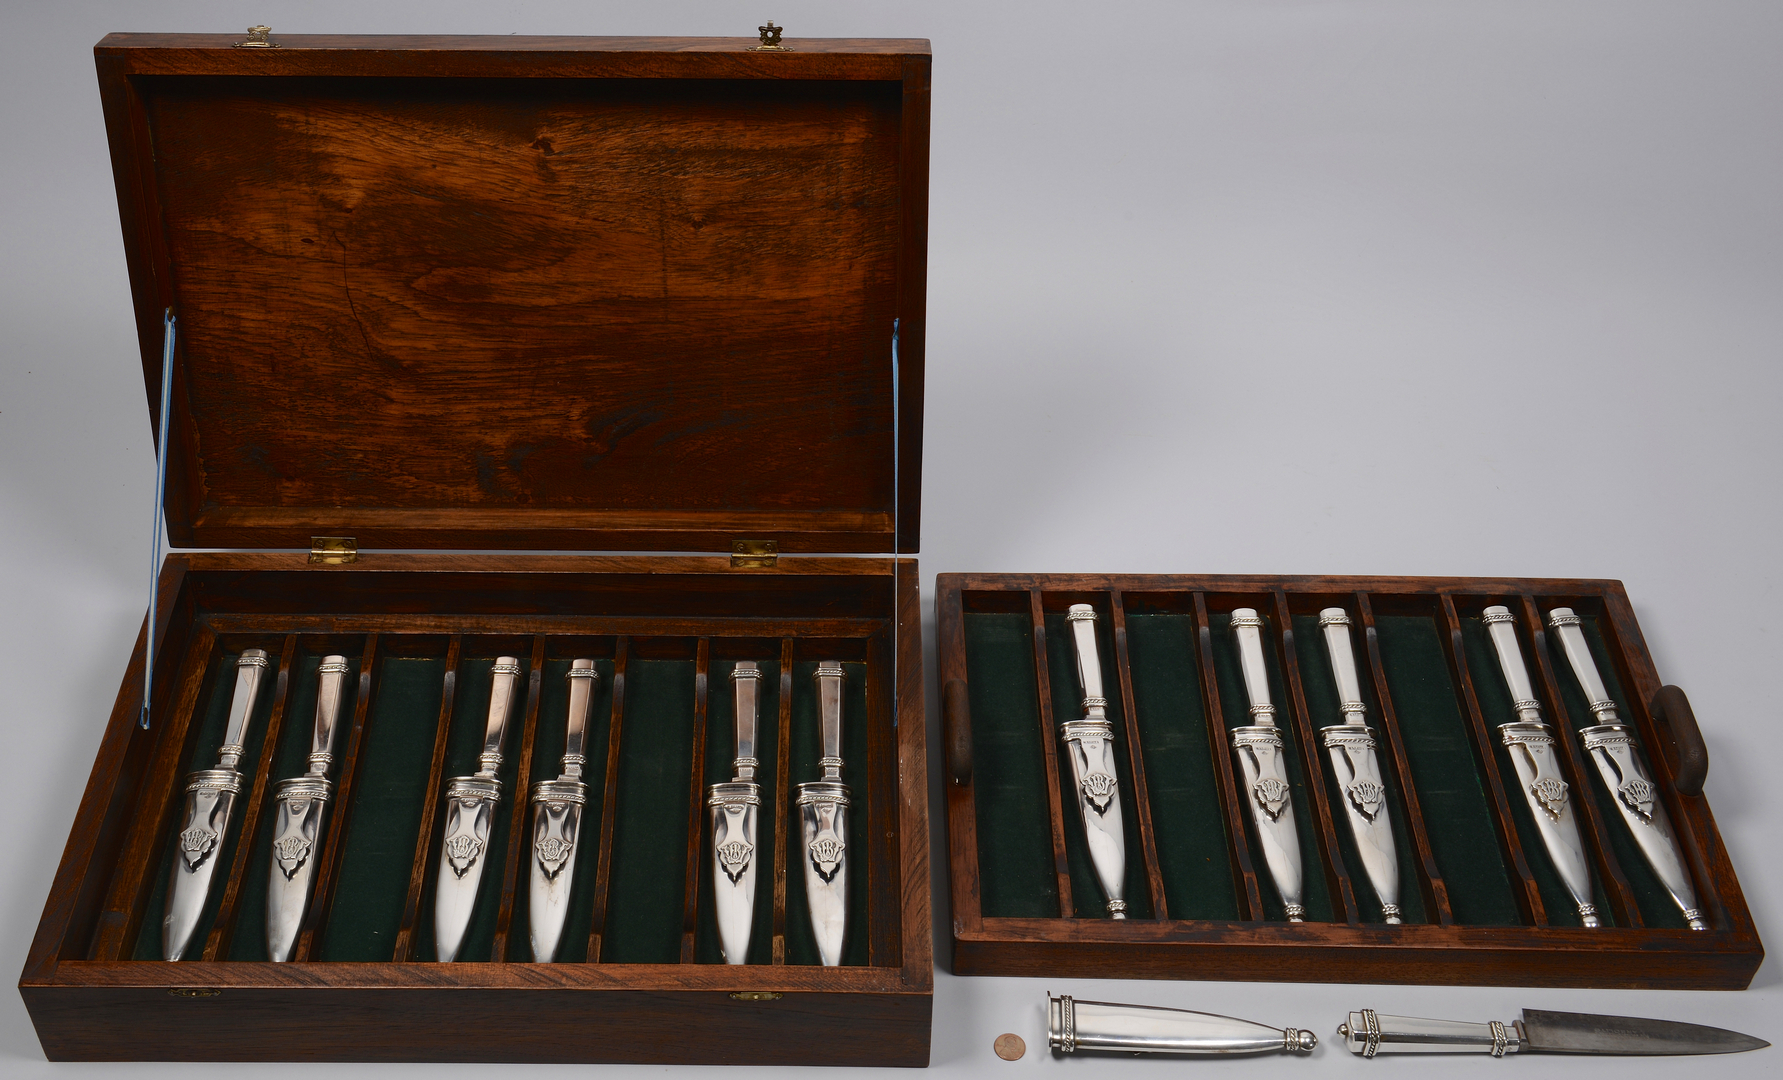 Lot 258: Set of 12 Silver Gaucho Knives, Argentina